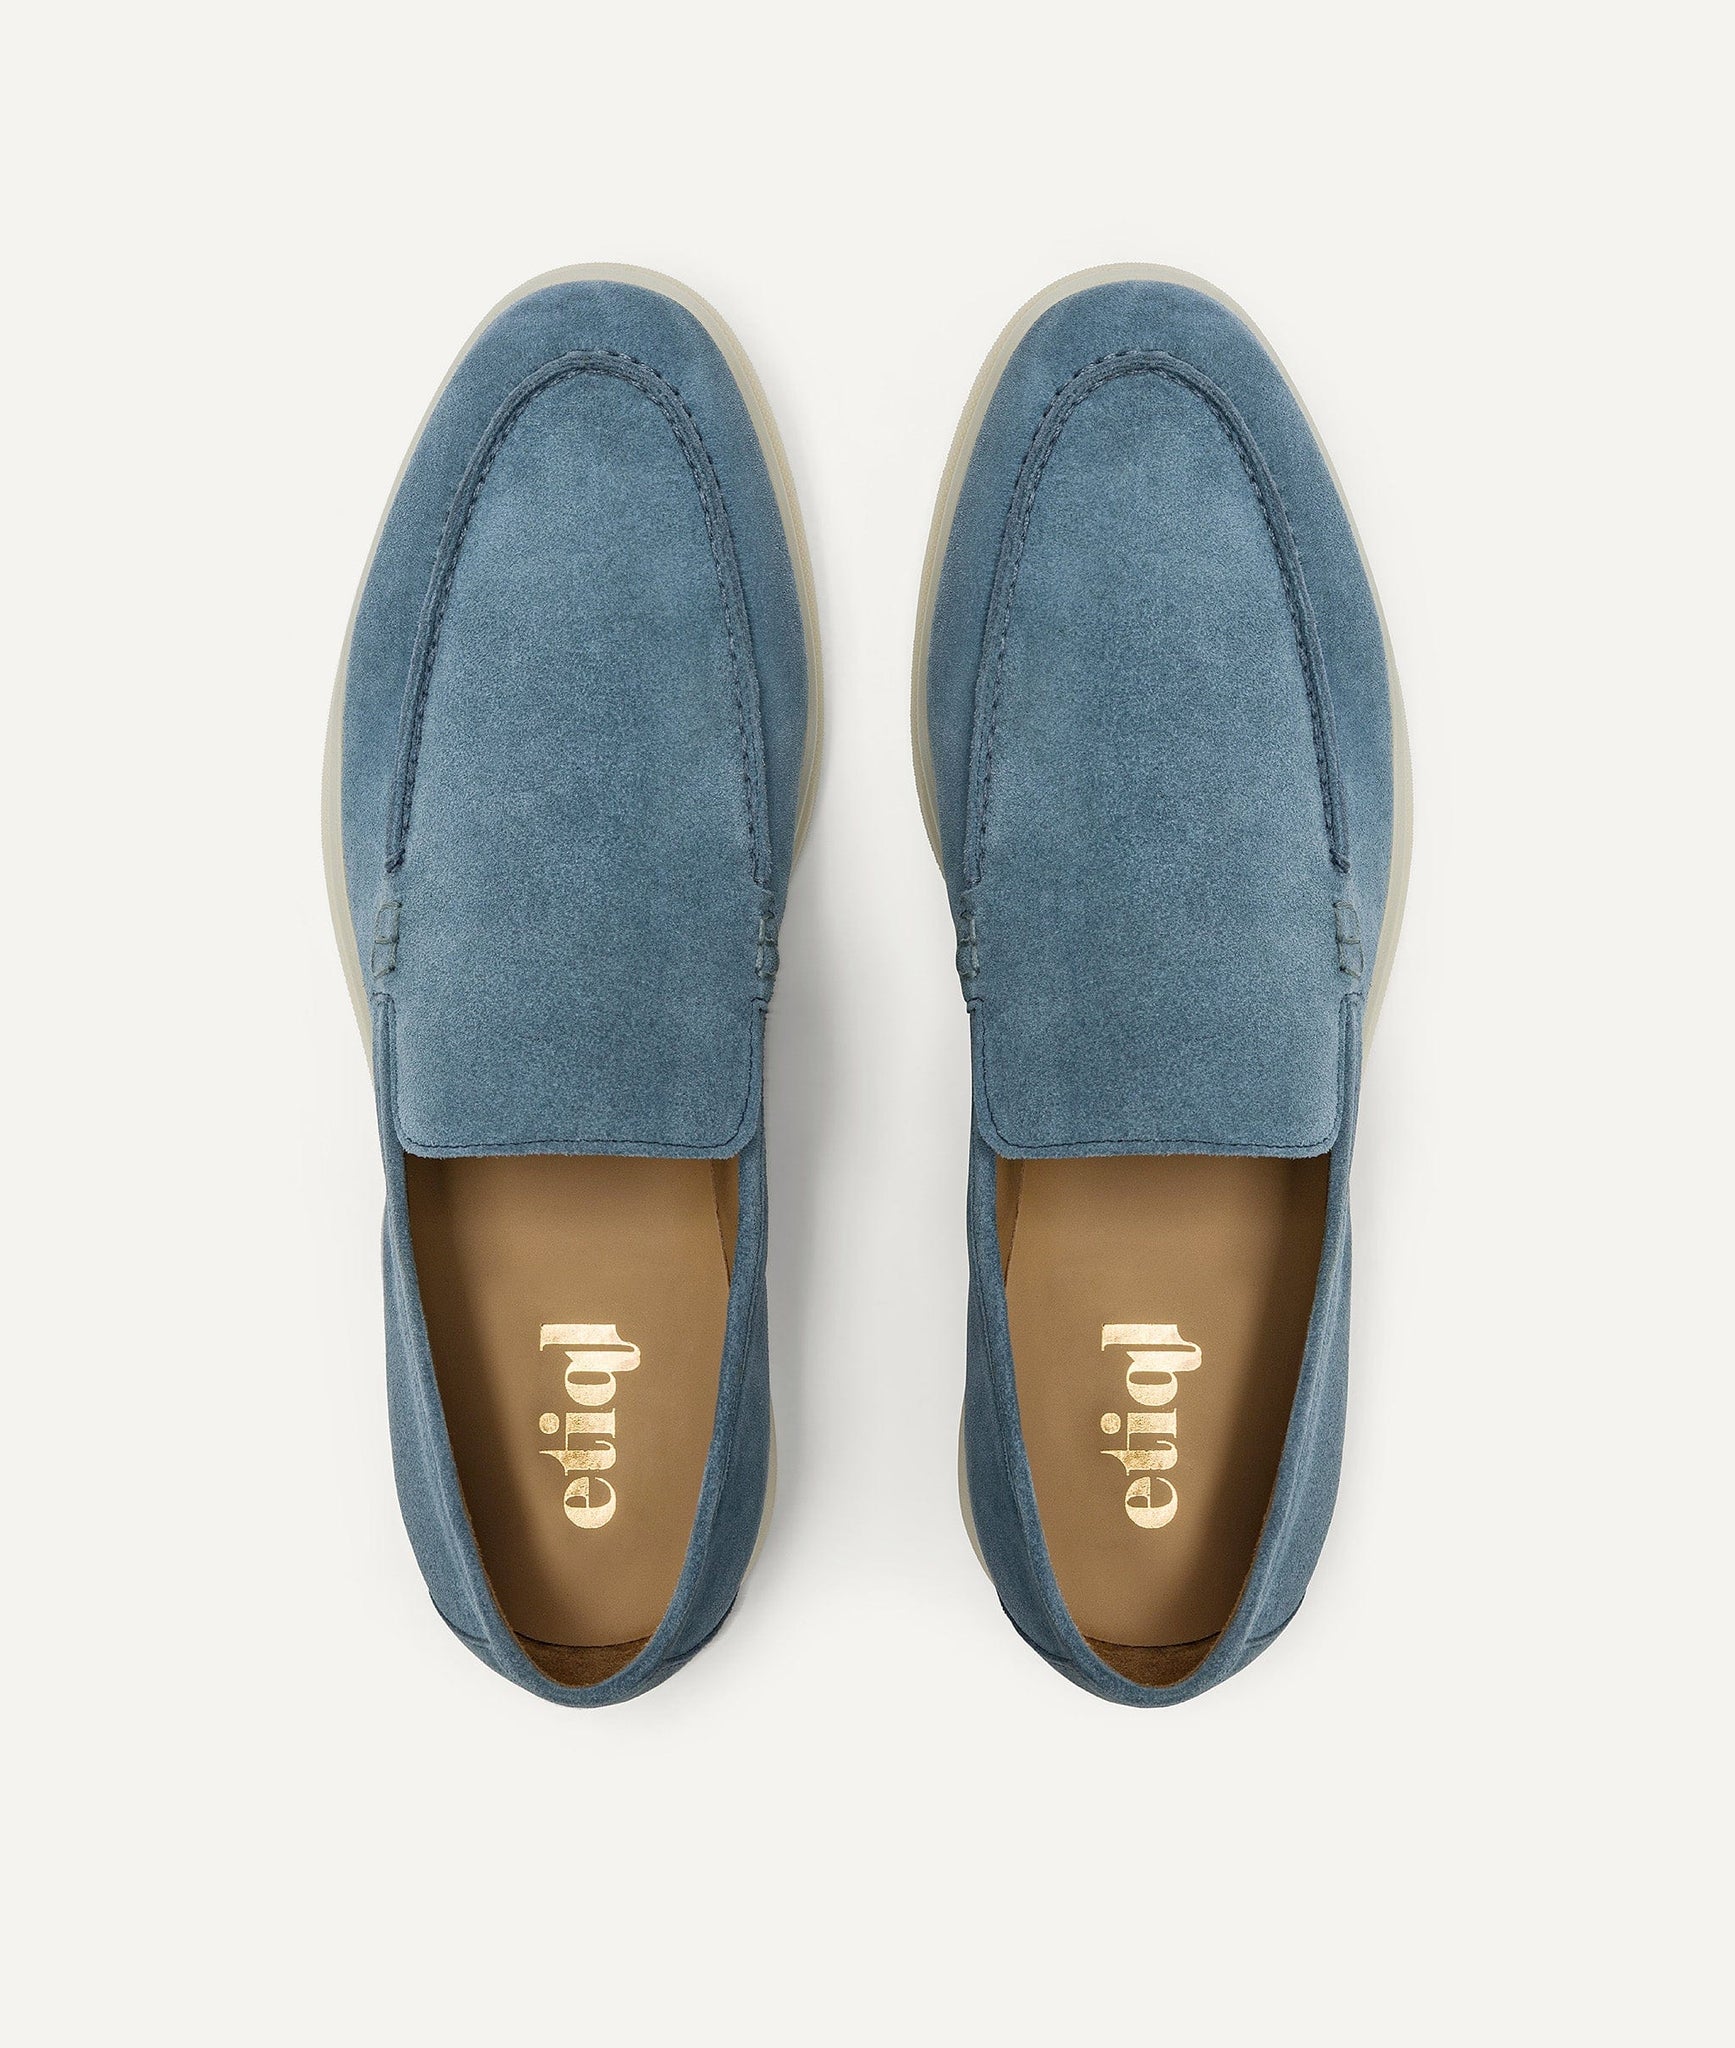 Summer Slipper in Suede Leather